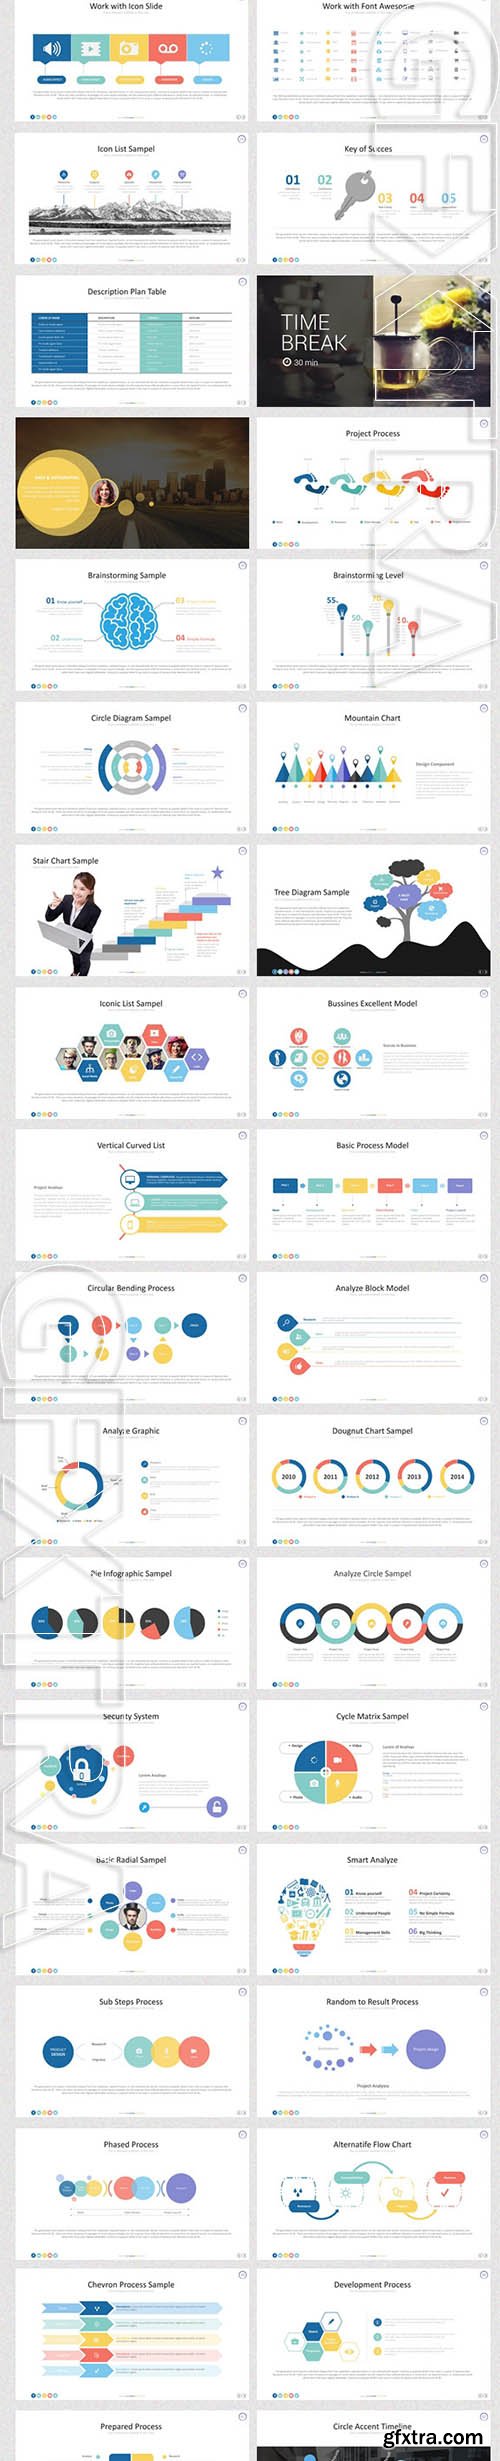 Wakwaw Powerpoint Template - Graphicriver 9966343